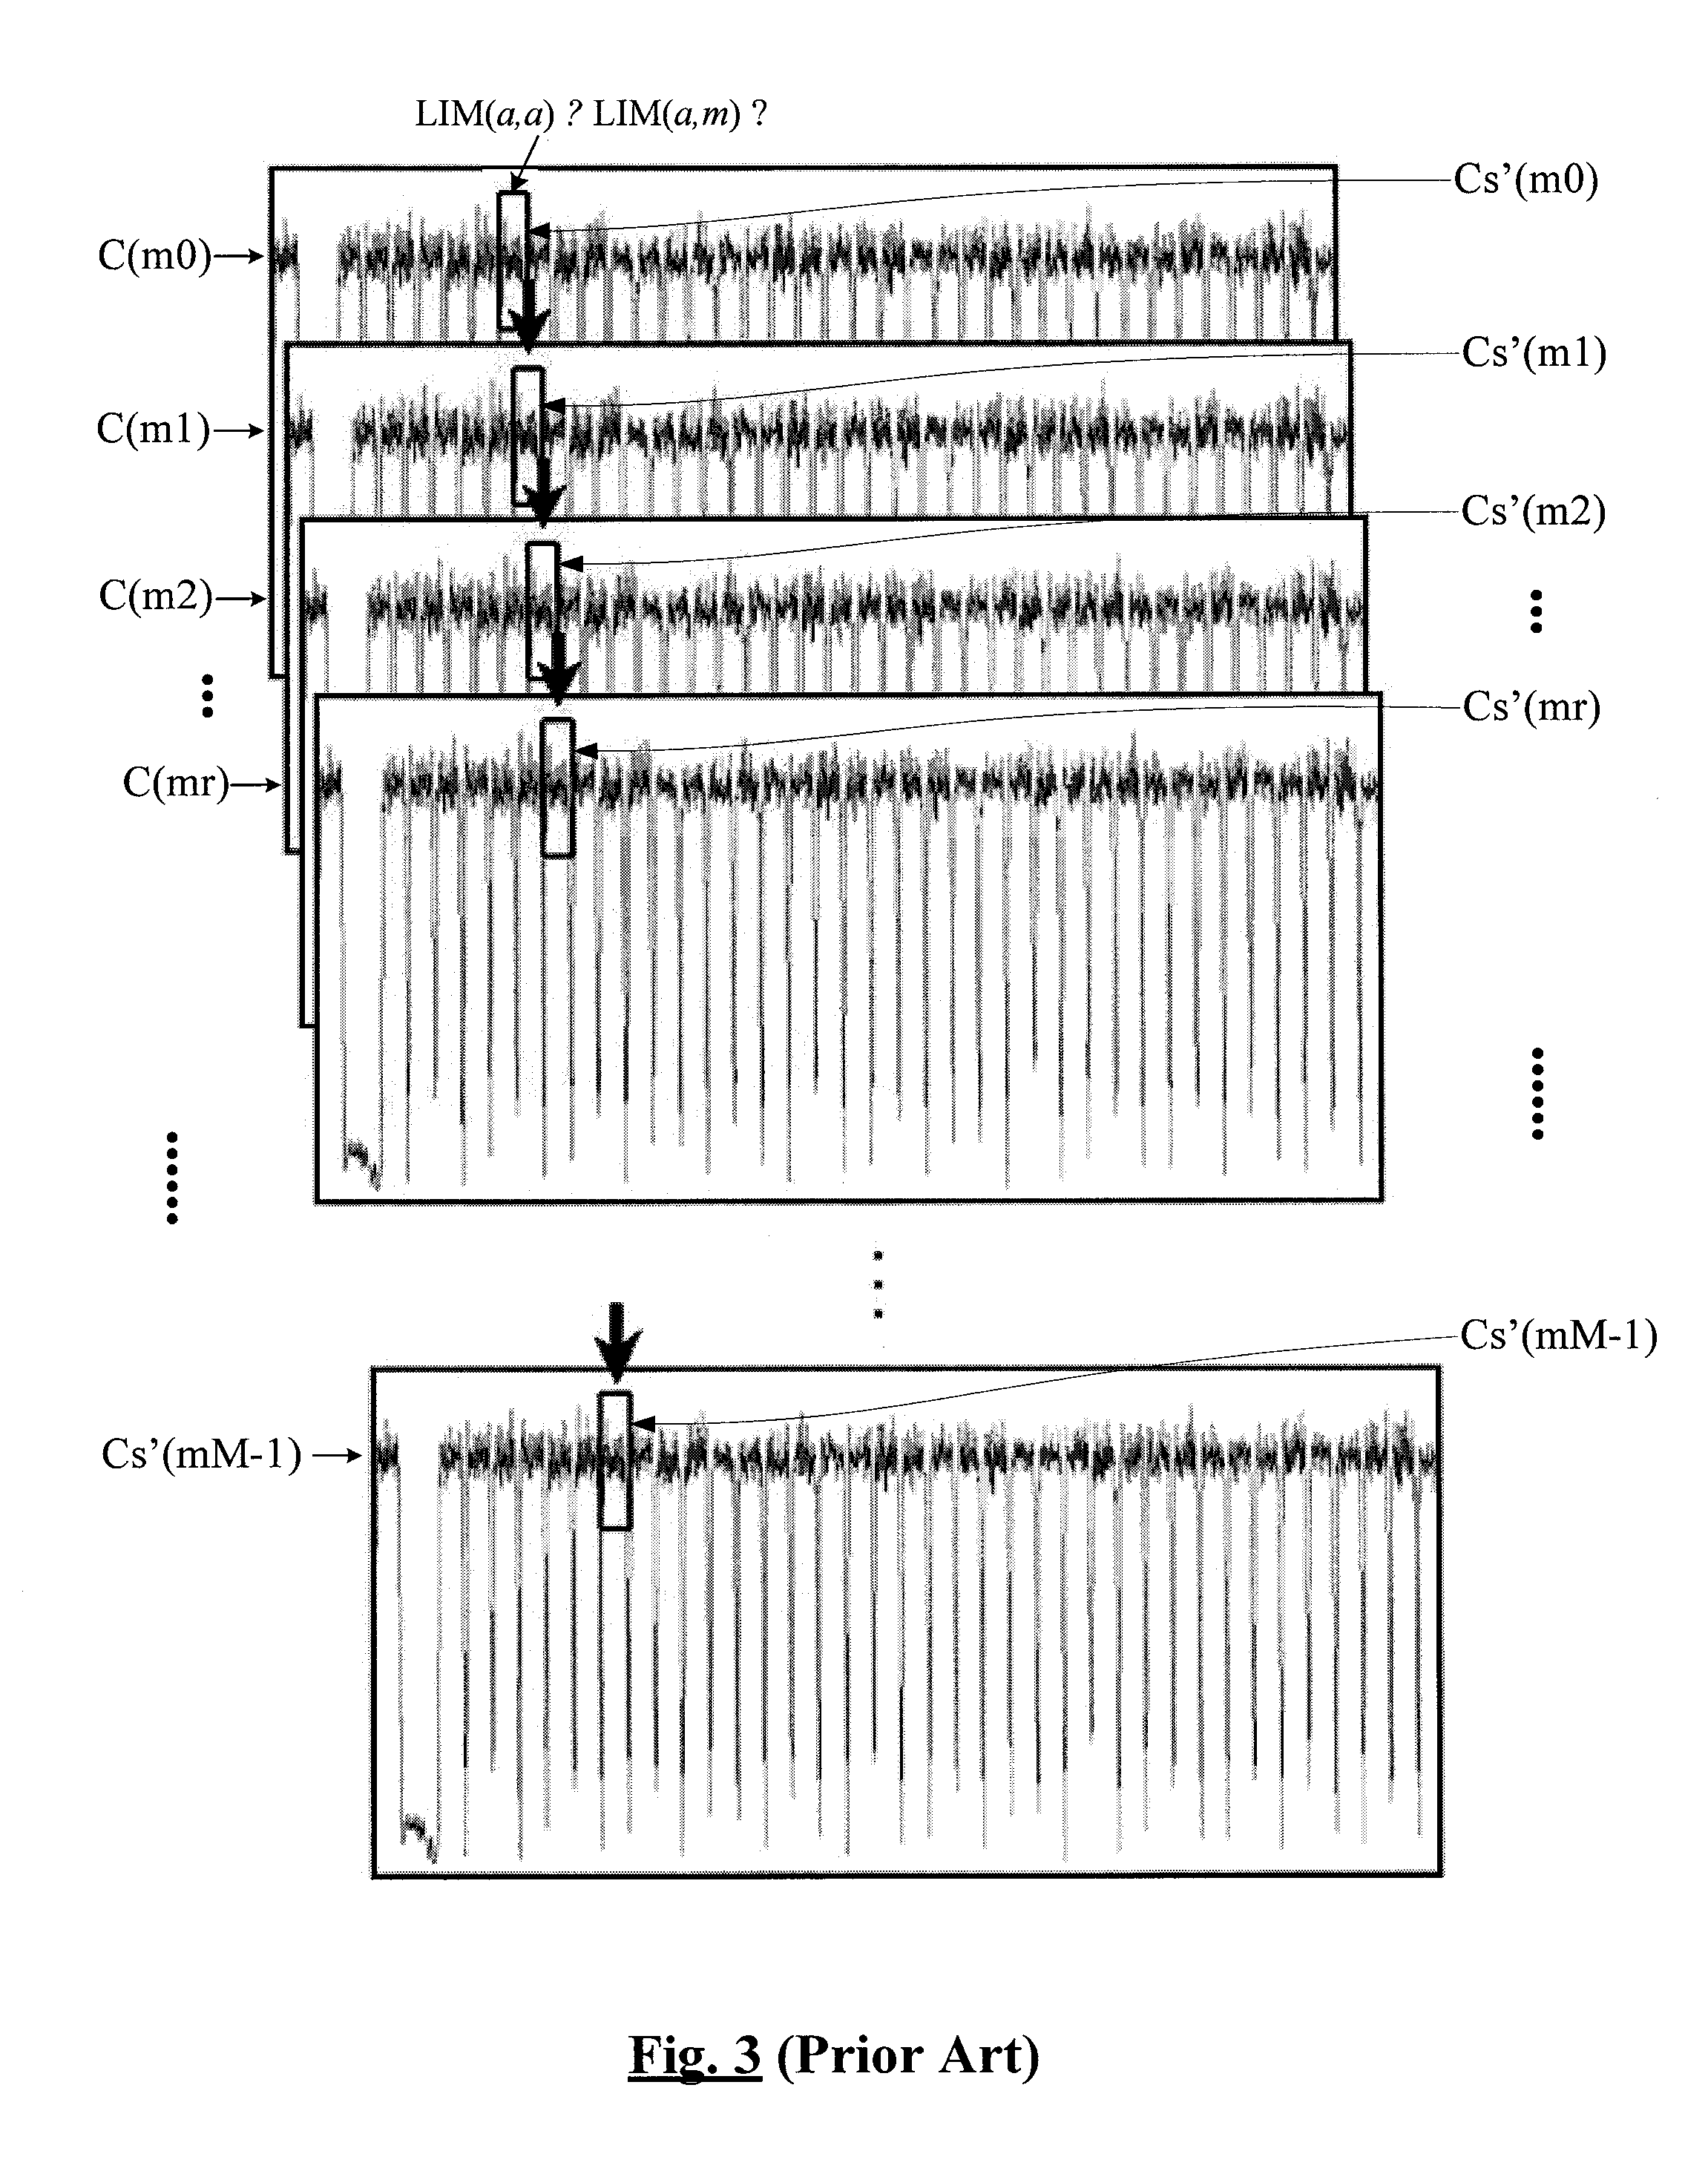 Integrated circuit protected against horizontal side channel analysis